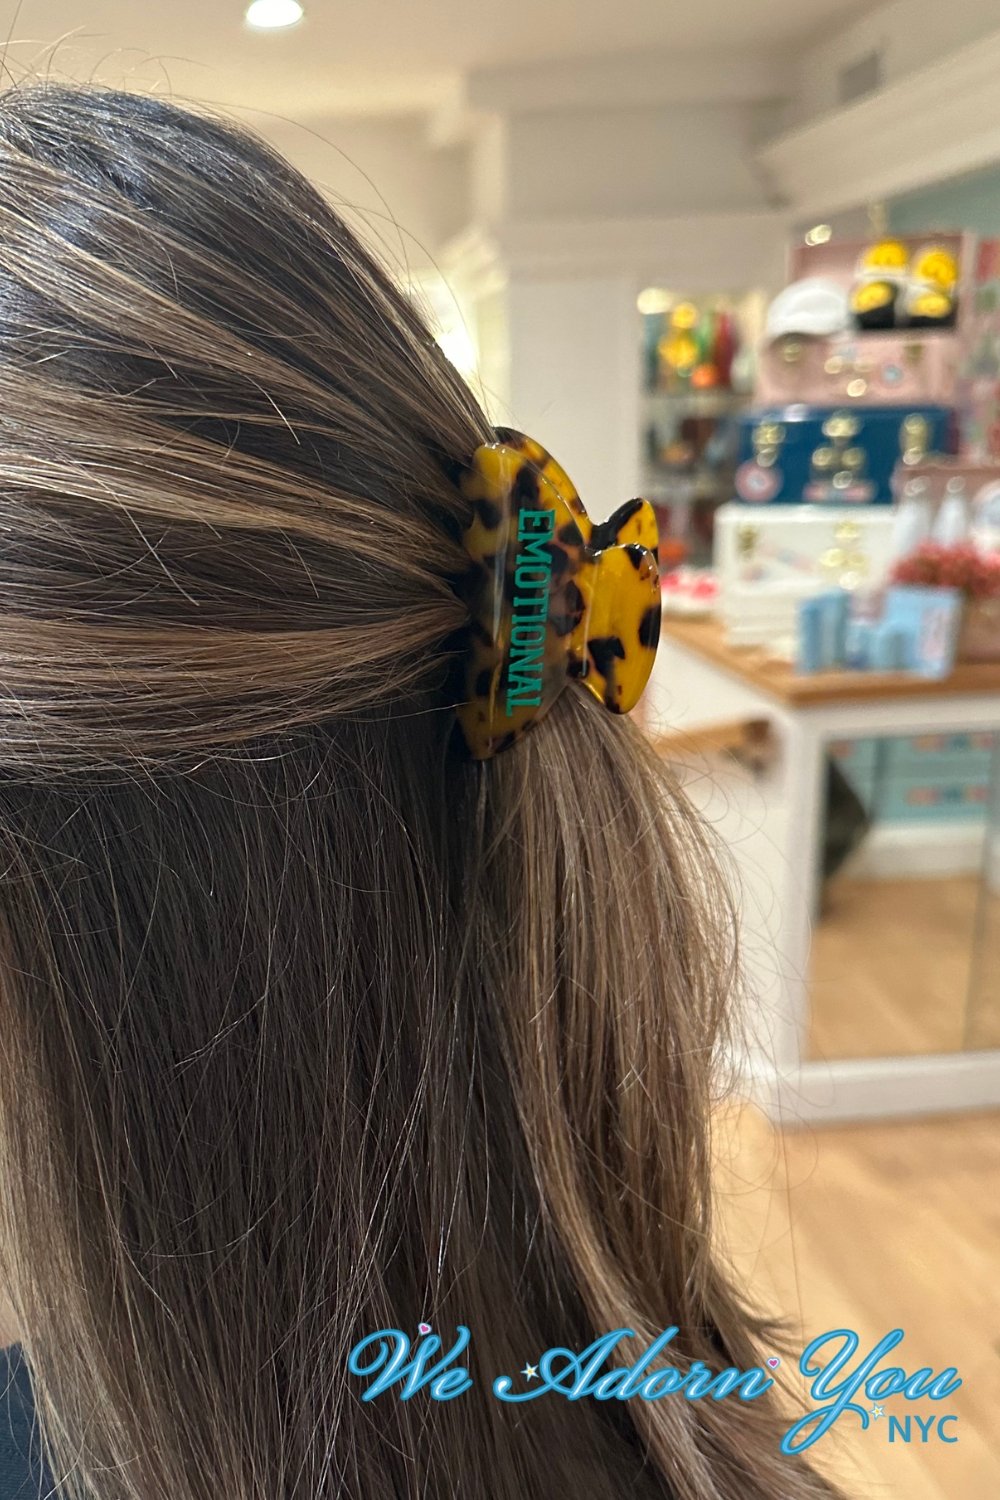 Hair Clips and Hair Accessories for Westchester Near Me Rye Scarsdale.jpg